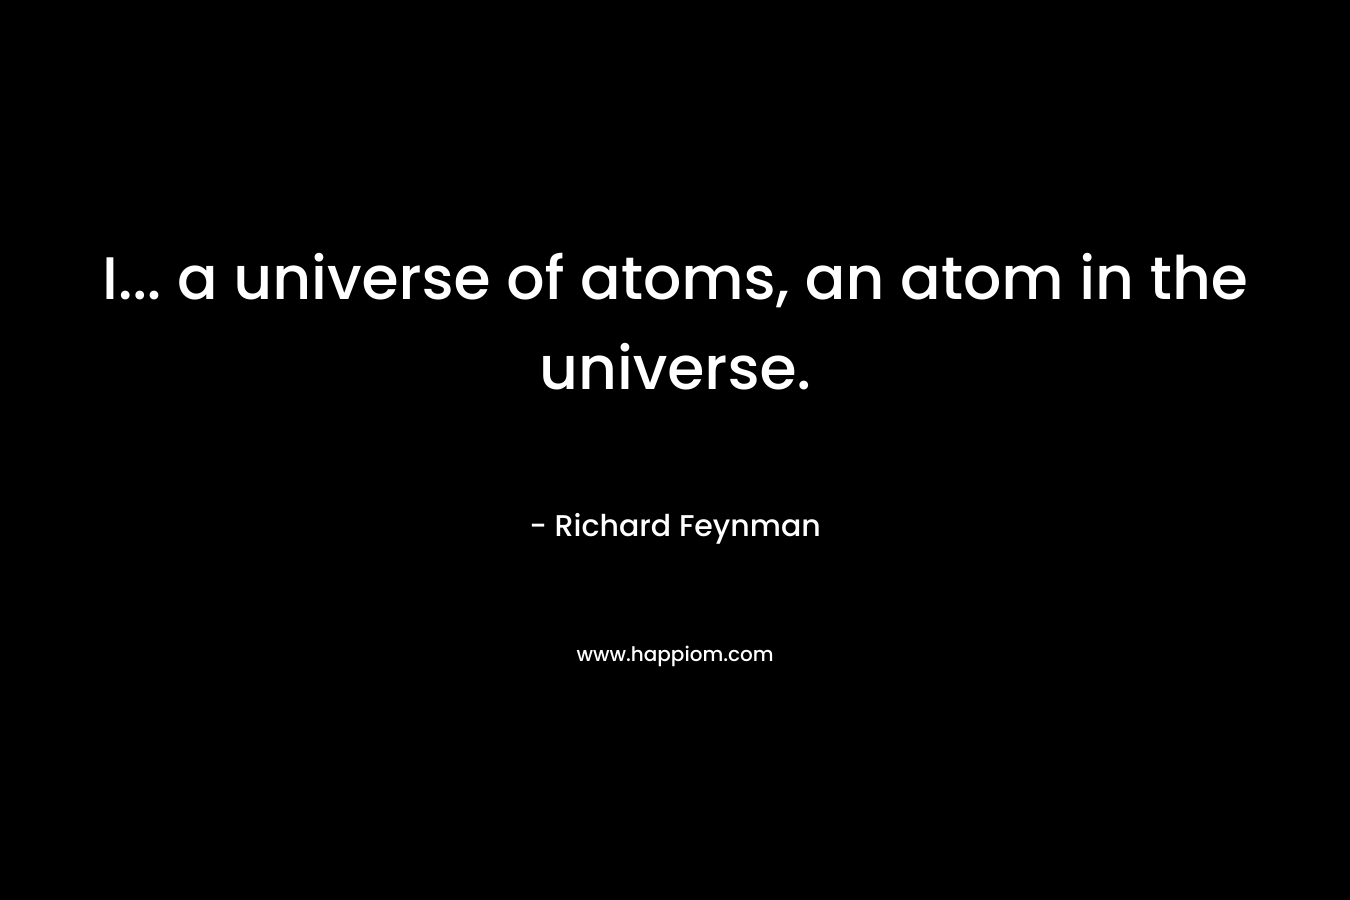 I... a universe of atoms, an atom in the universe.